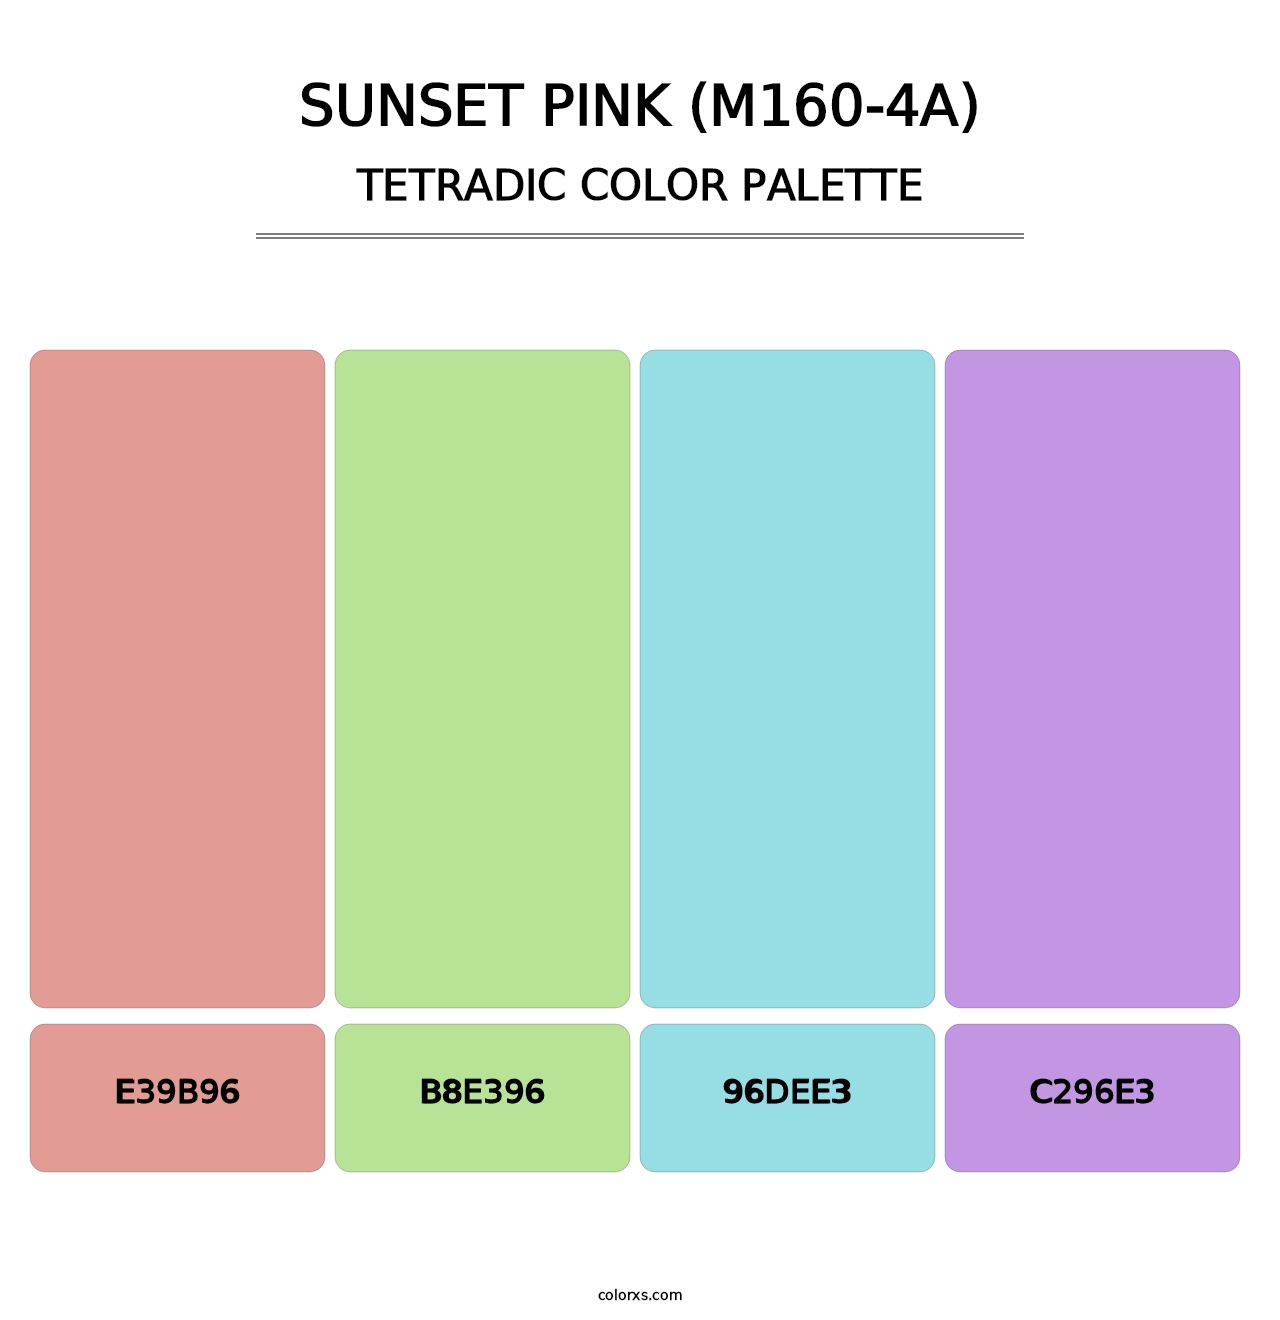 Sunset Pink (M160-4A) - Tetradic Color Palette